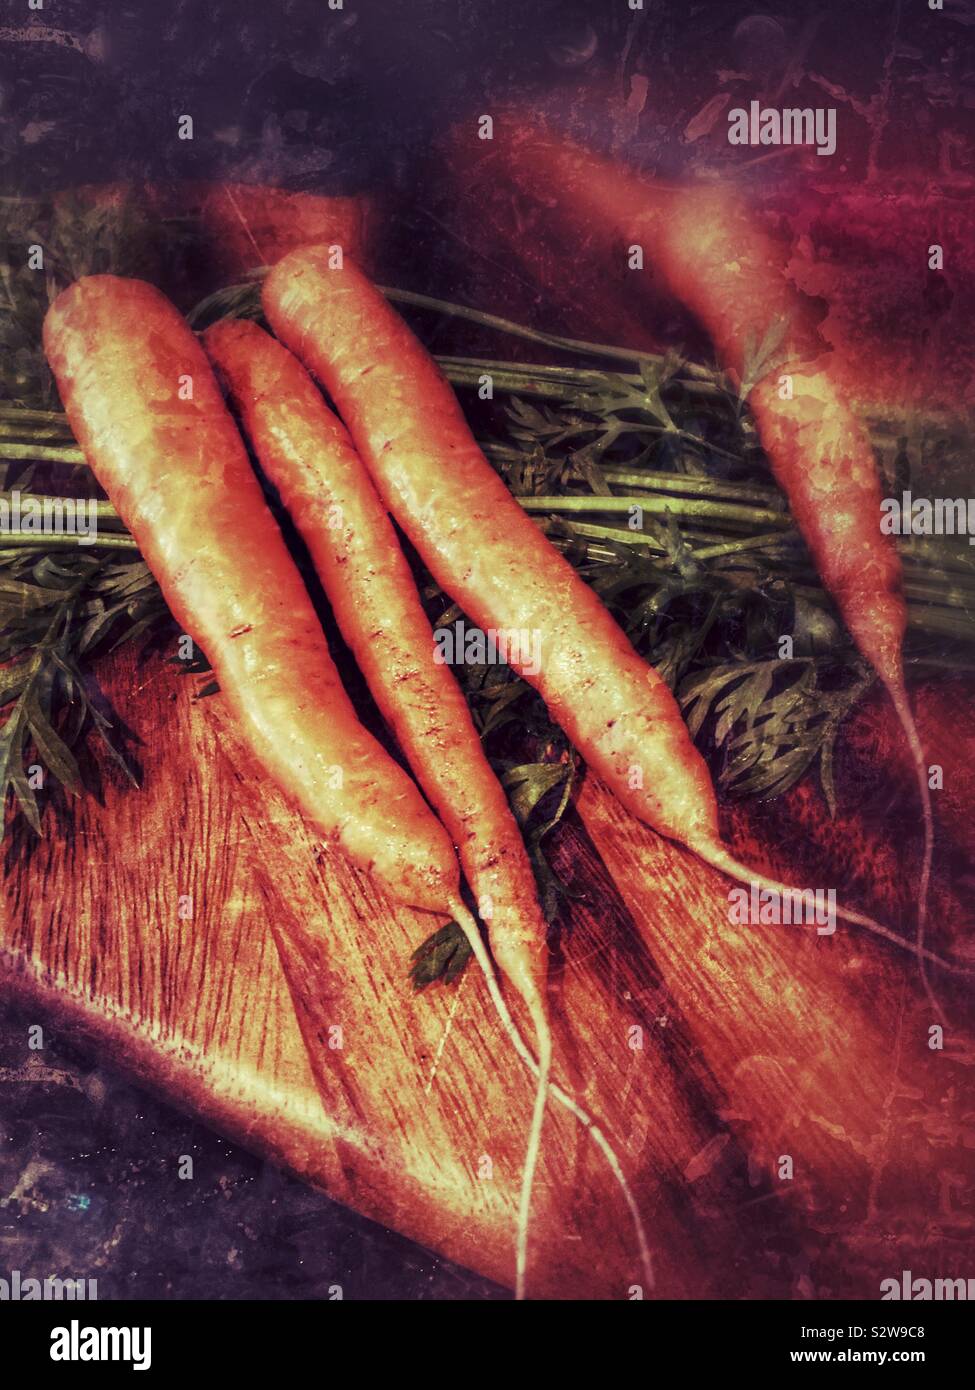 Grunge effect carrots on a chopping board Stock Photo